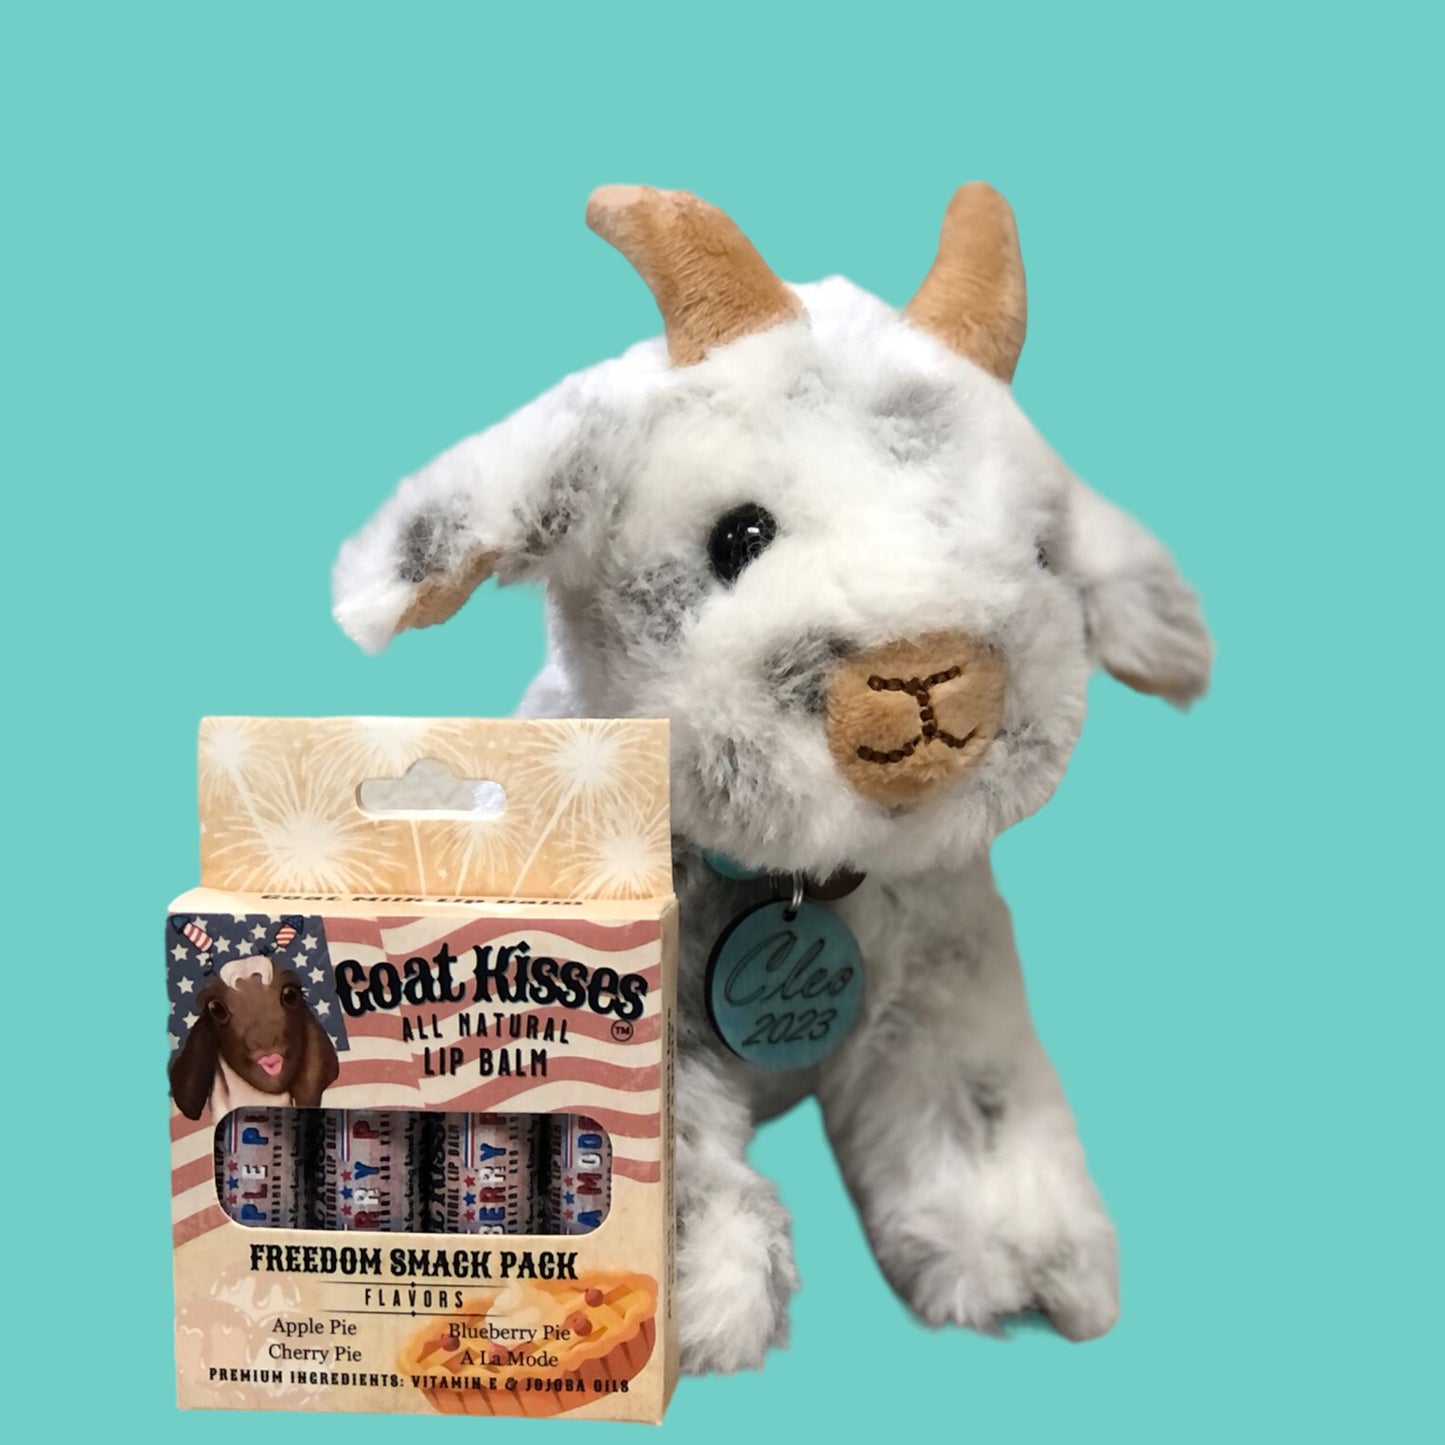 Cleo the Goat and Goat Kisses. Gift Set